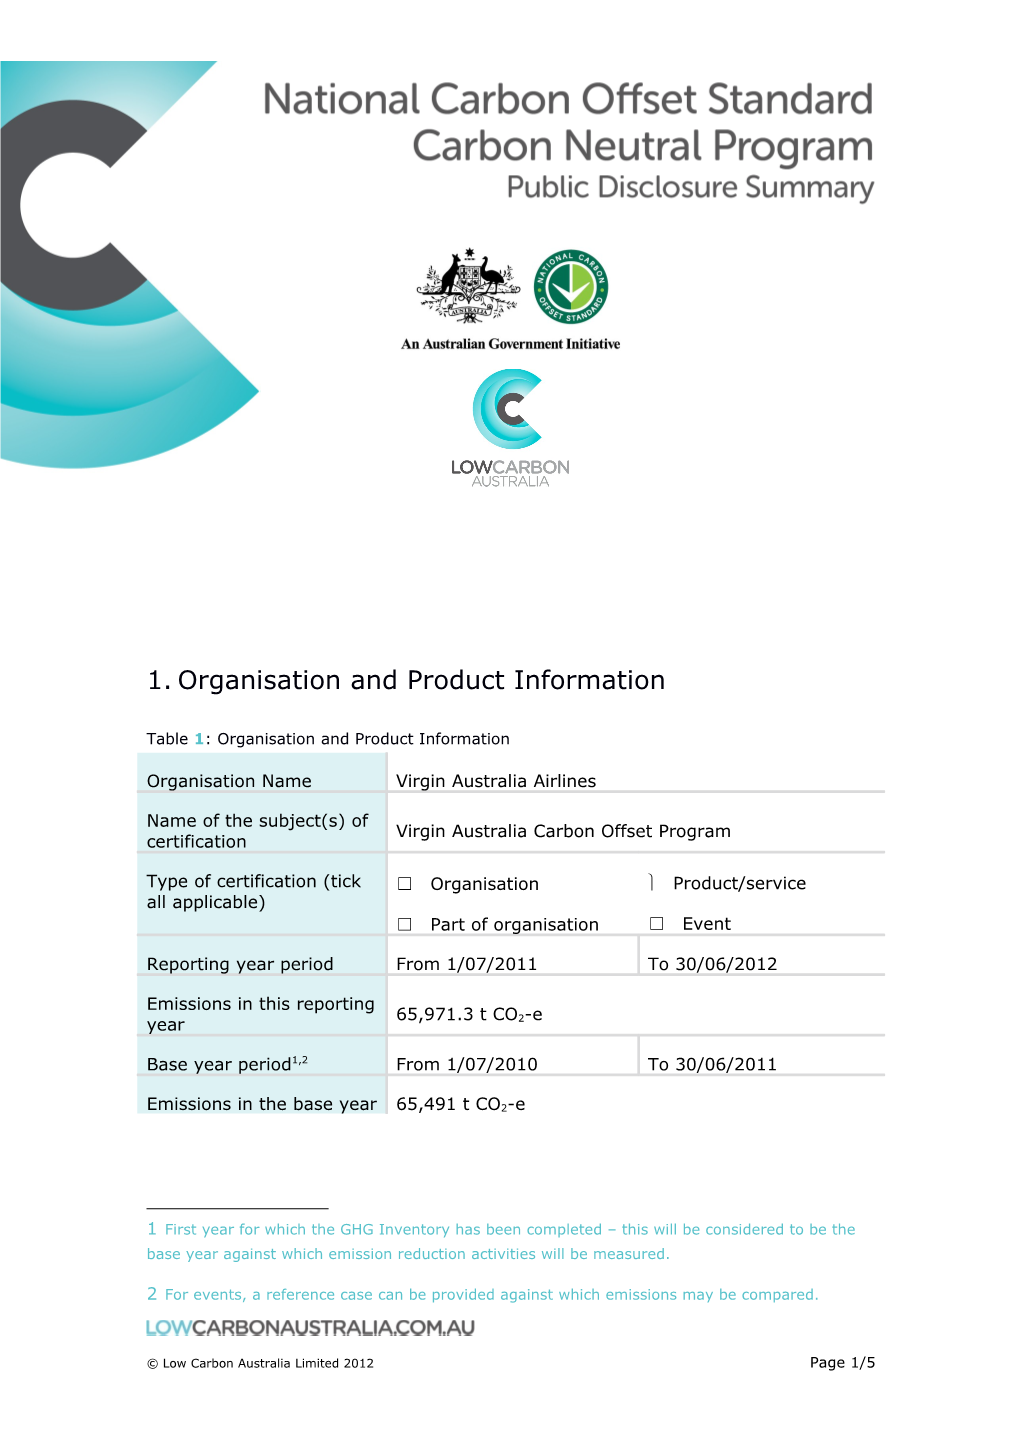 1. Organisation and Product Information